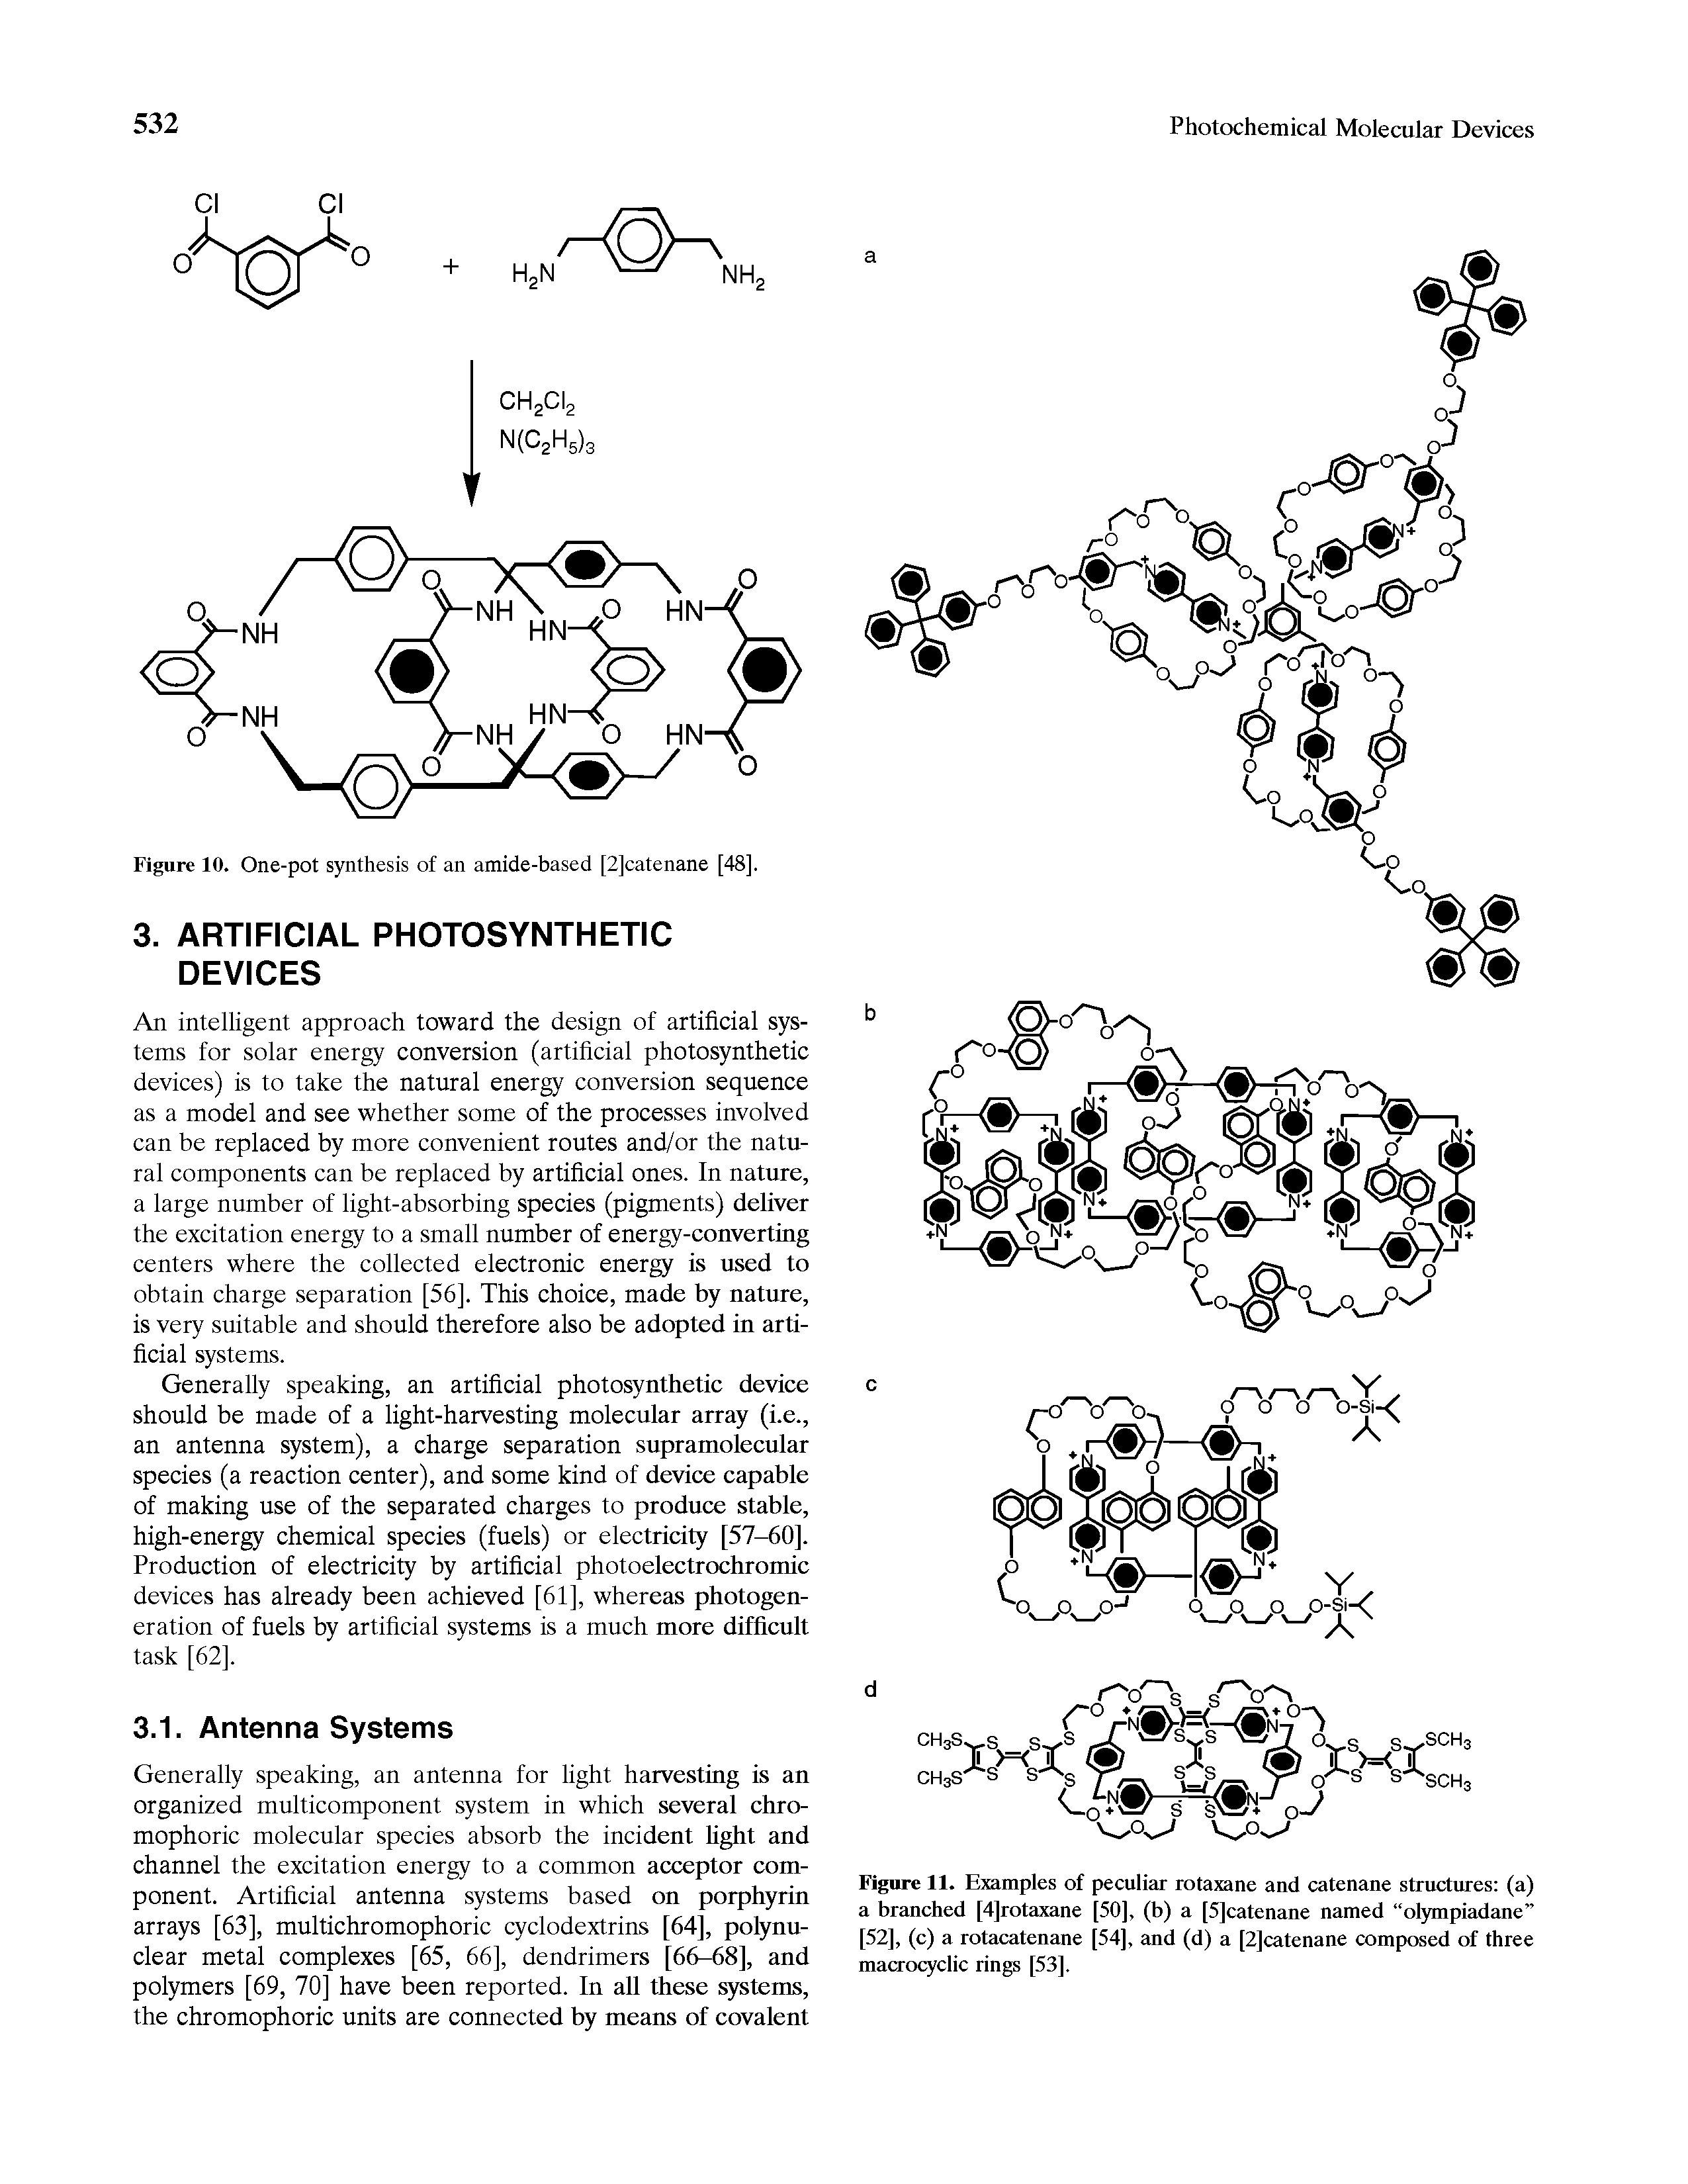 Figure 11. Examples of peculiar rotaxane and catenane structures (a) a branched [4]rotaxane [50], (b) a [5]catenane named olympiadane [52], (c) a rotacatenane [54], and (d) a [2]catenane composed of three macrocyclic rings [53],...